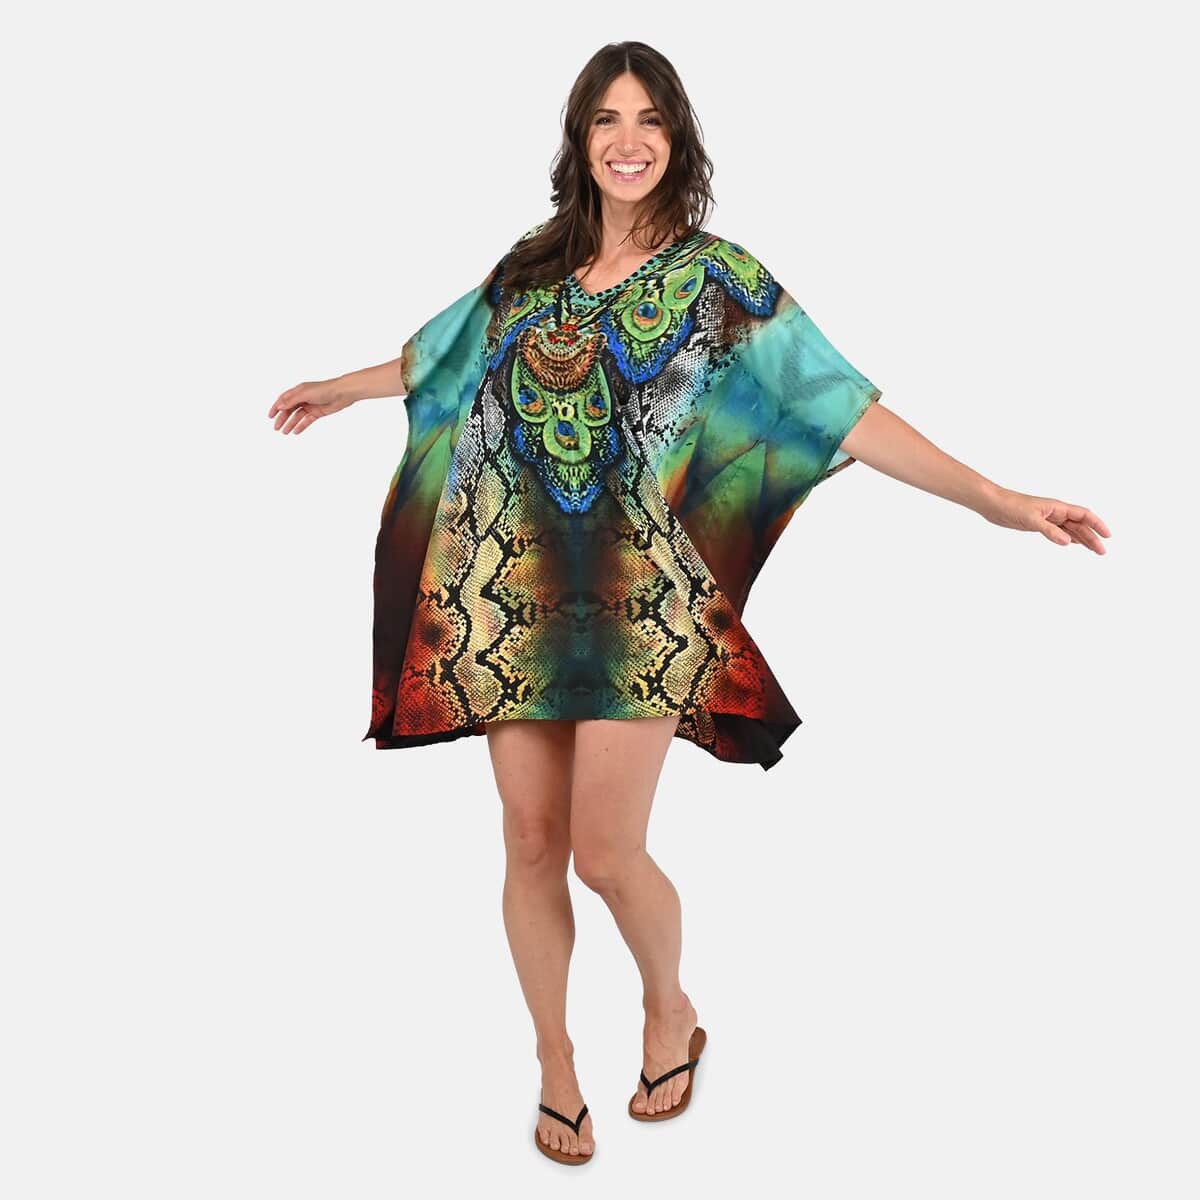 TAMSY Turquoise Cheetah & Peacock Feather Screen Printed Kaftan - One Size Fits Most image number 0